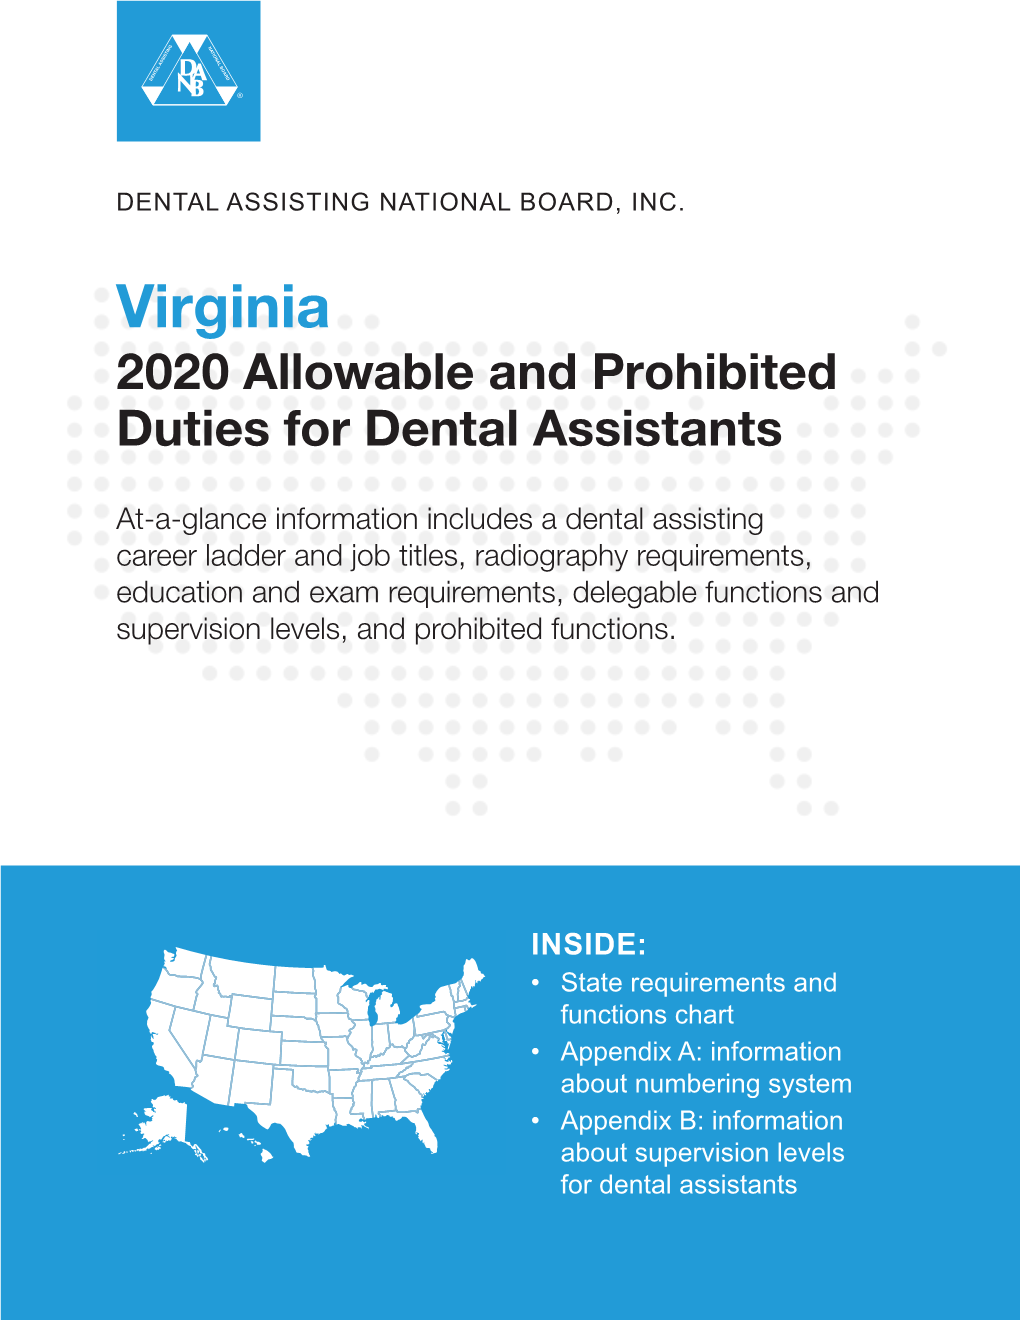 Virginia 2020 Allowable and Prohibited Duties for Dental Assistants